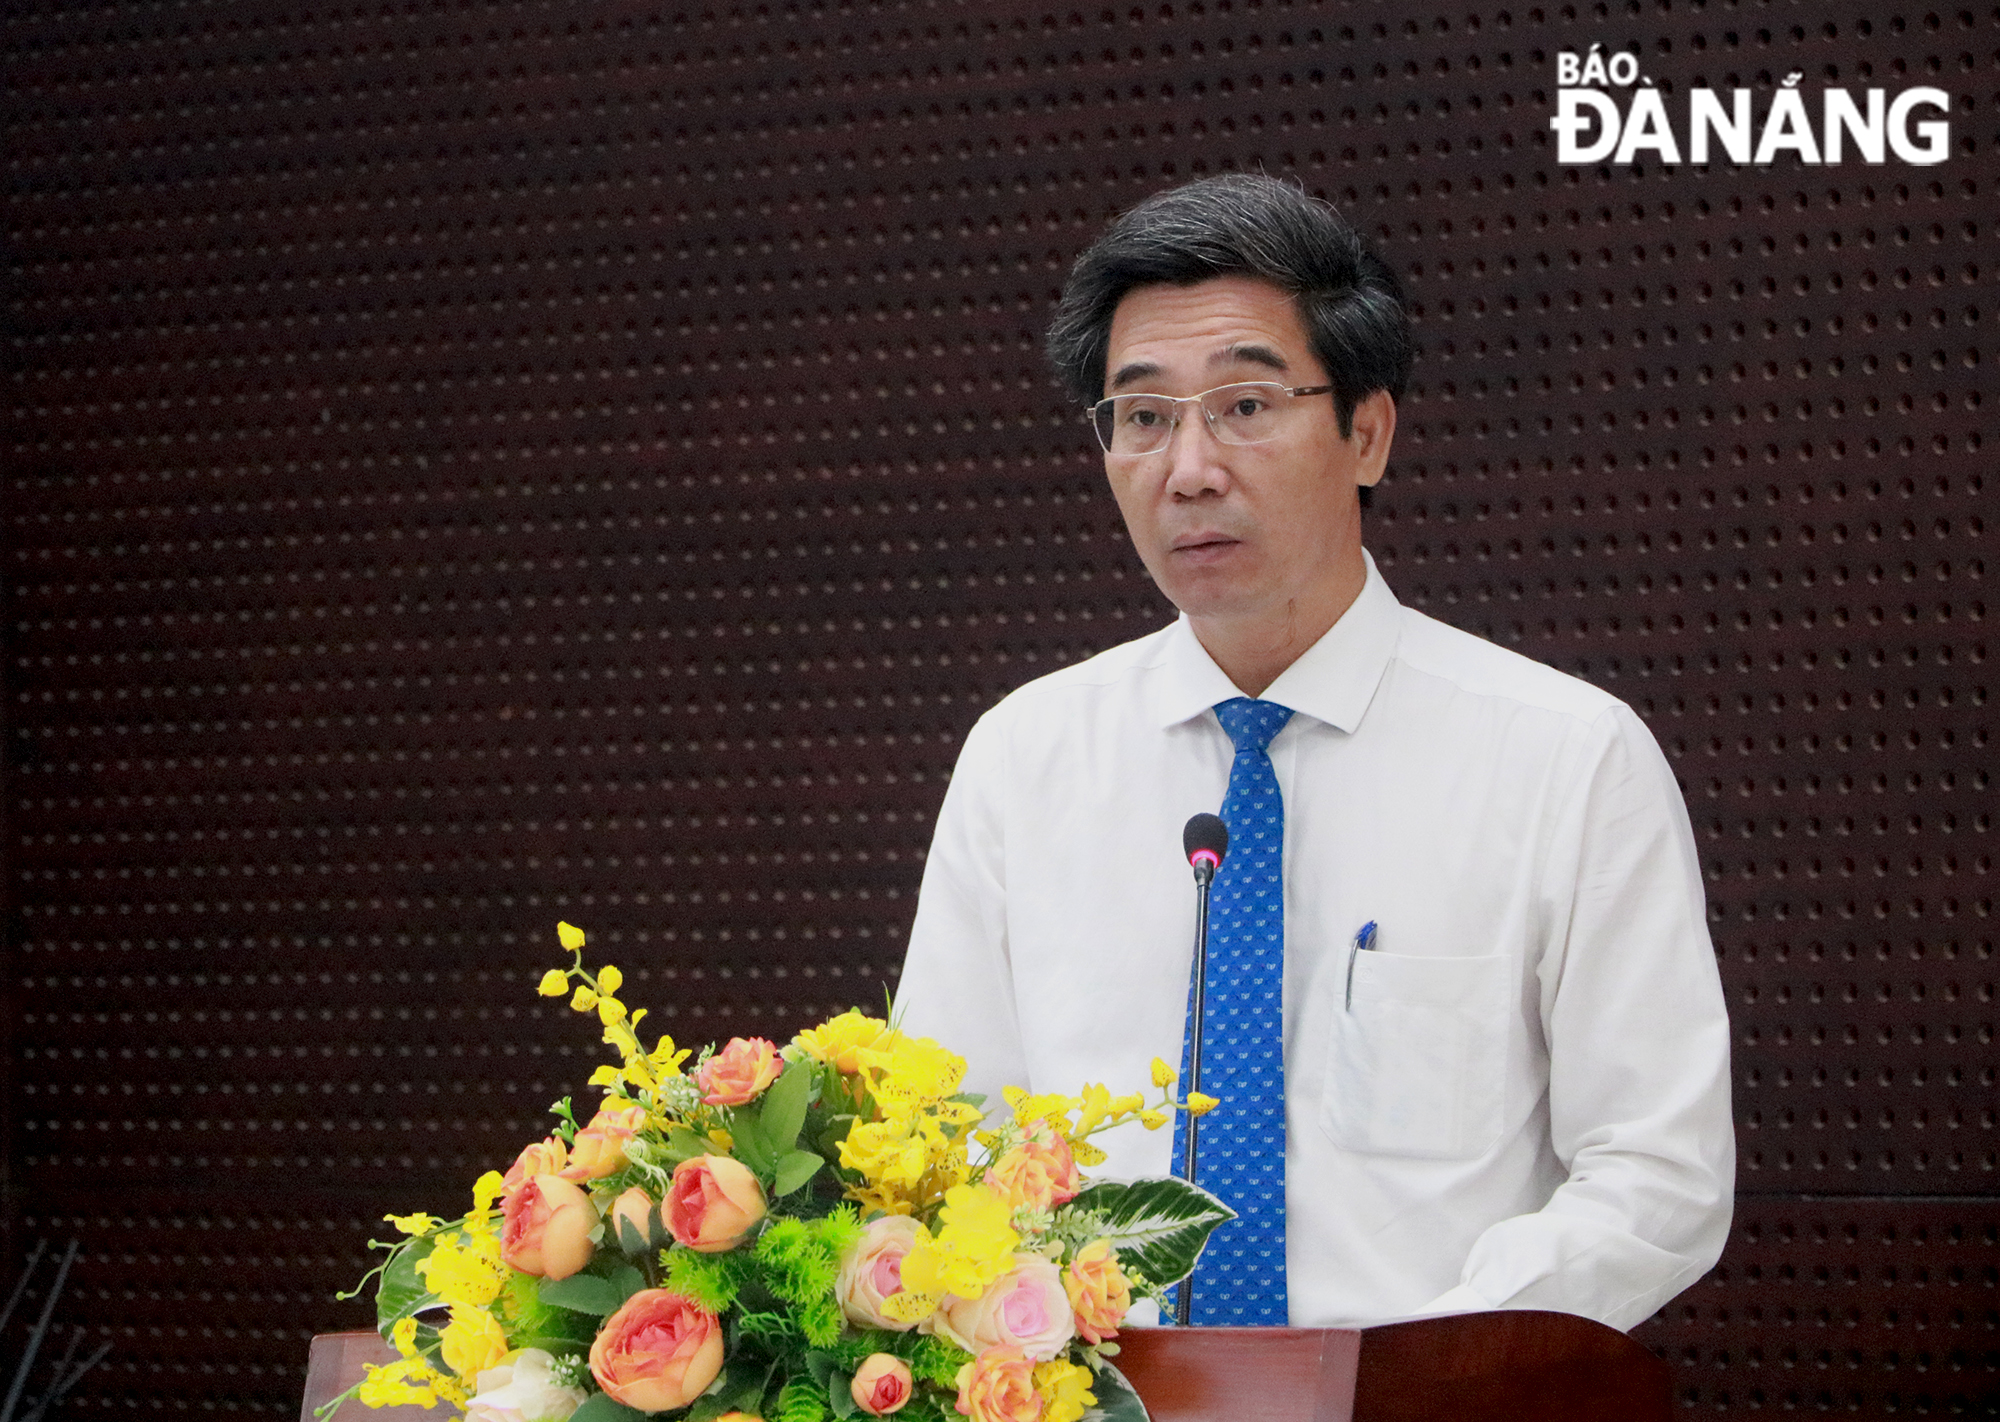 Da Nang People’s Committee Vice Chairman Tran Chi Cuong speaking at the ceremony